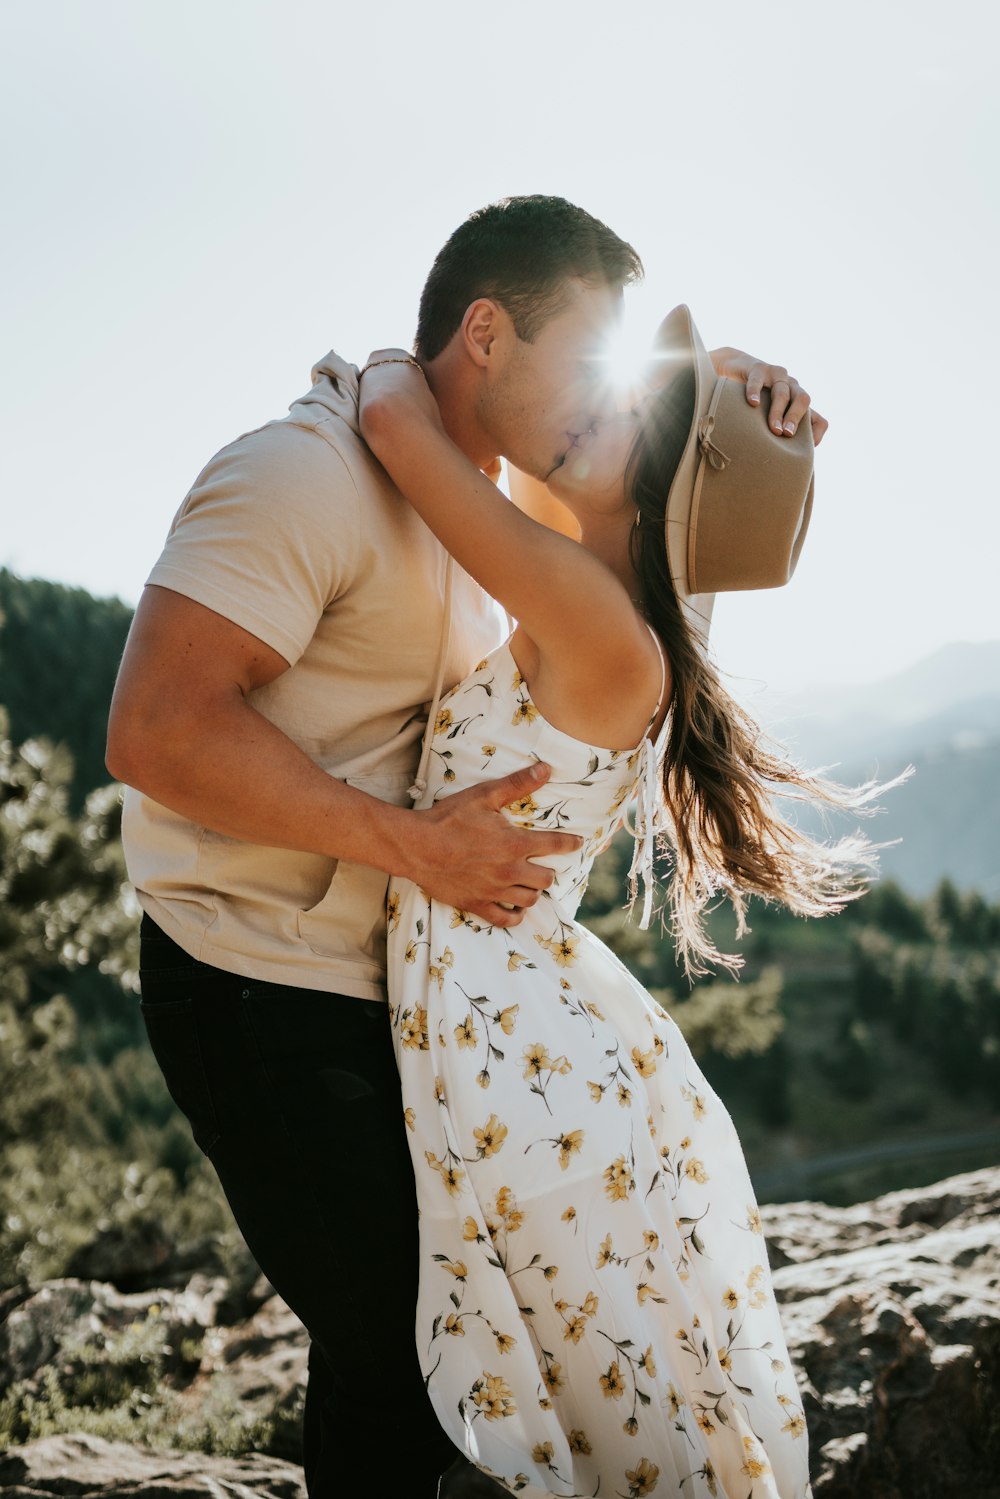 man in brown shirt kissing woman in white floral dress